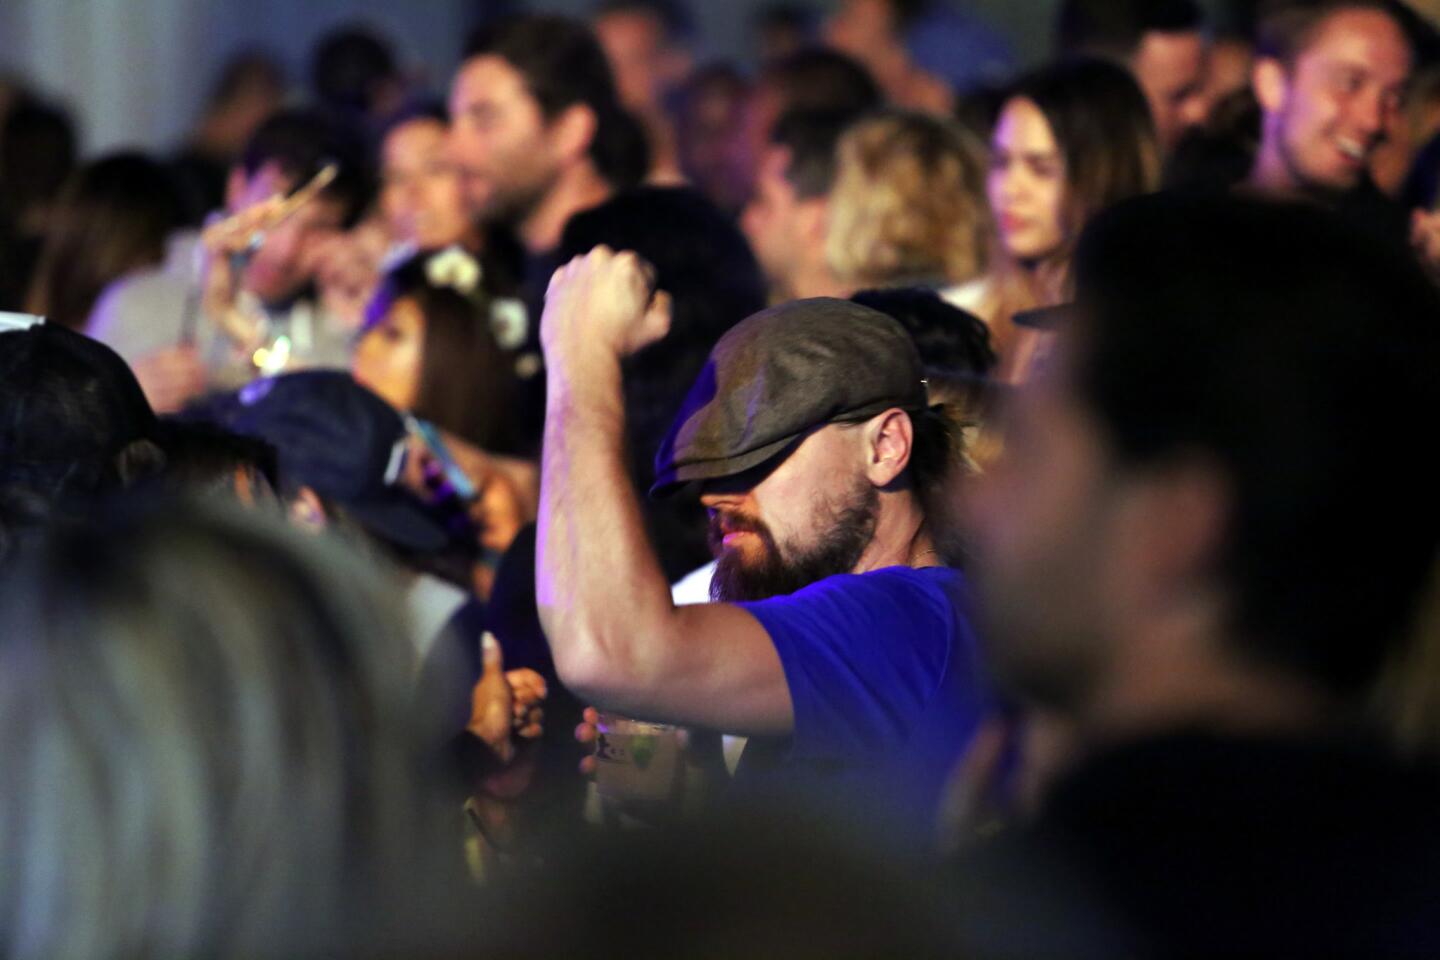 Actor Leonardo DiCaprio feels the groove at the Neon Carnival.